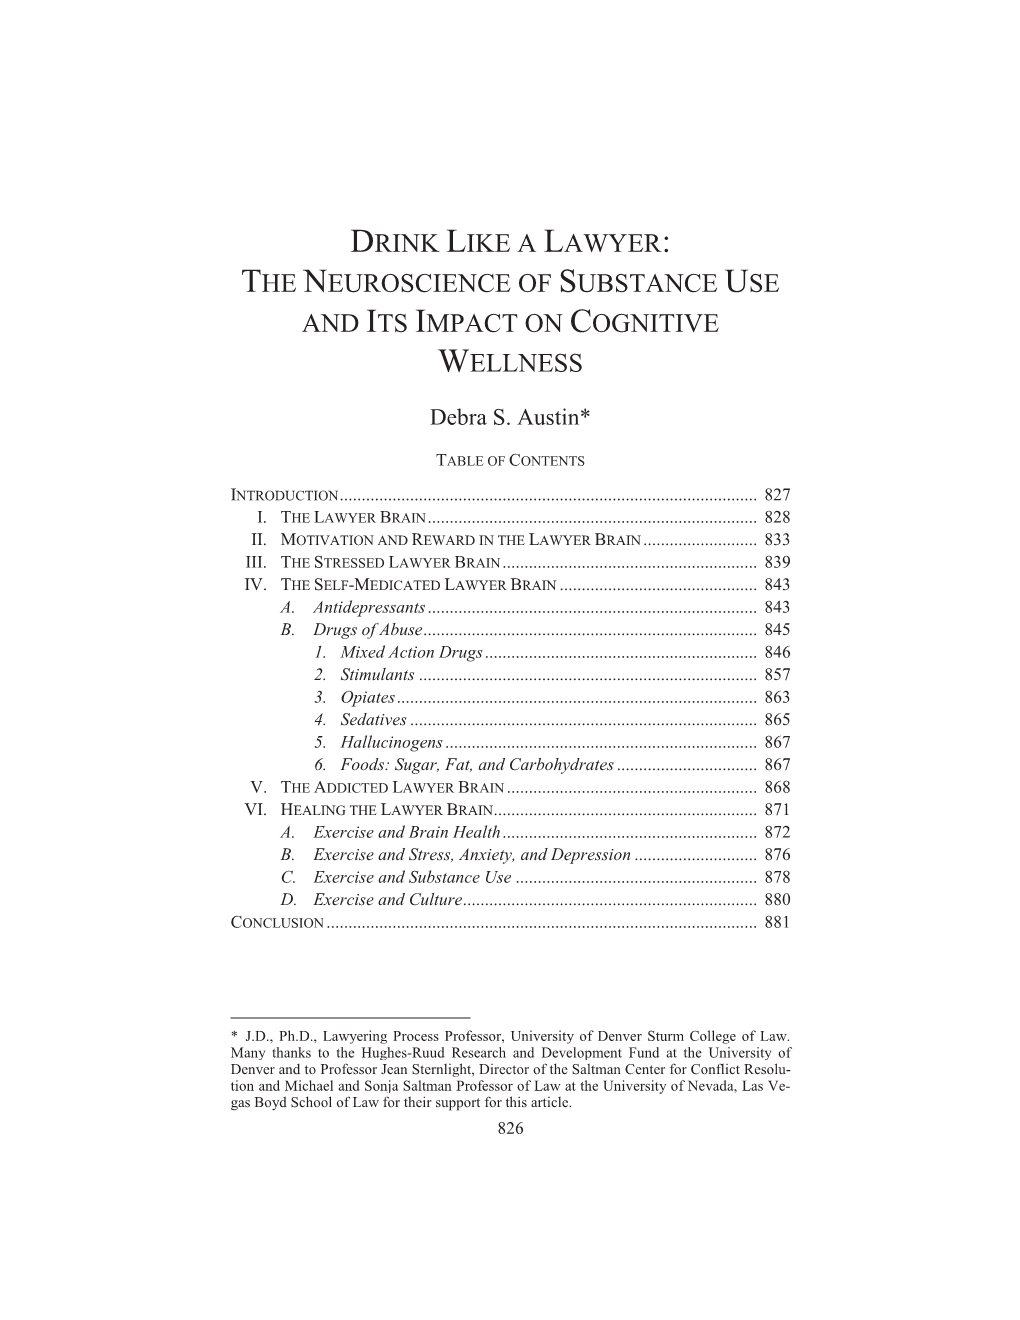 Drink Like a Lawyer: the Neuroscience of Substance Use and Its Impact on Cognitive Wellness